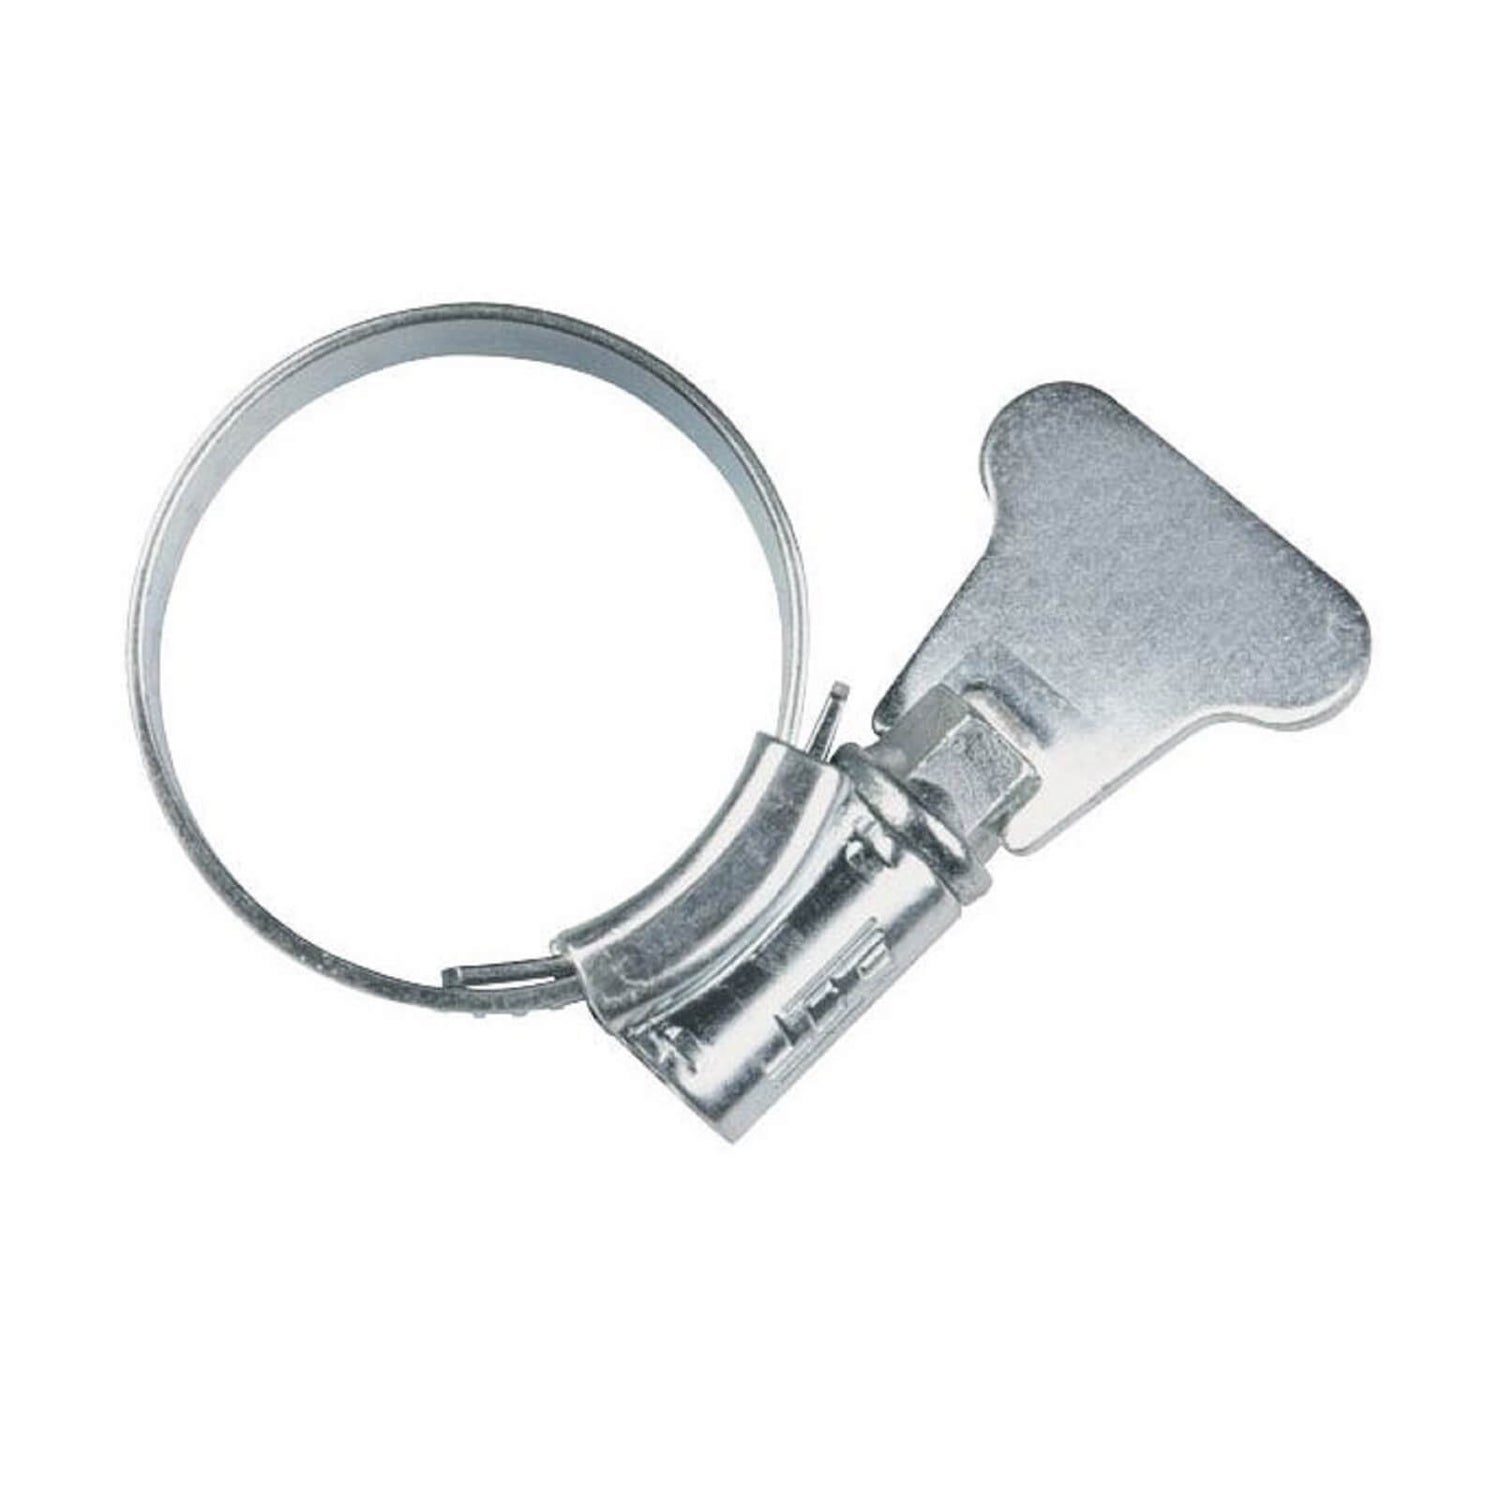 BUTTERFLY HOSE CLIP 25MM